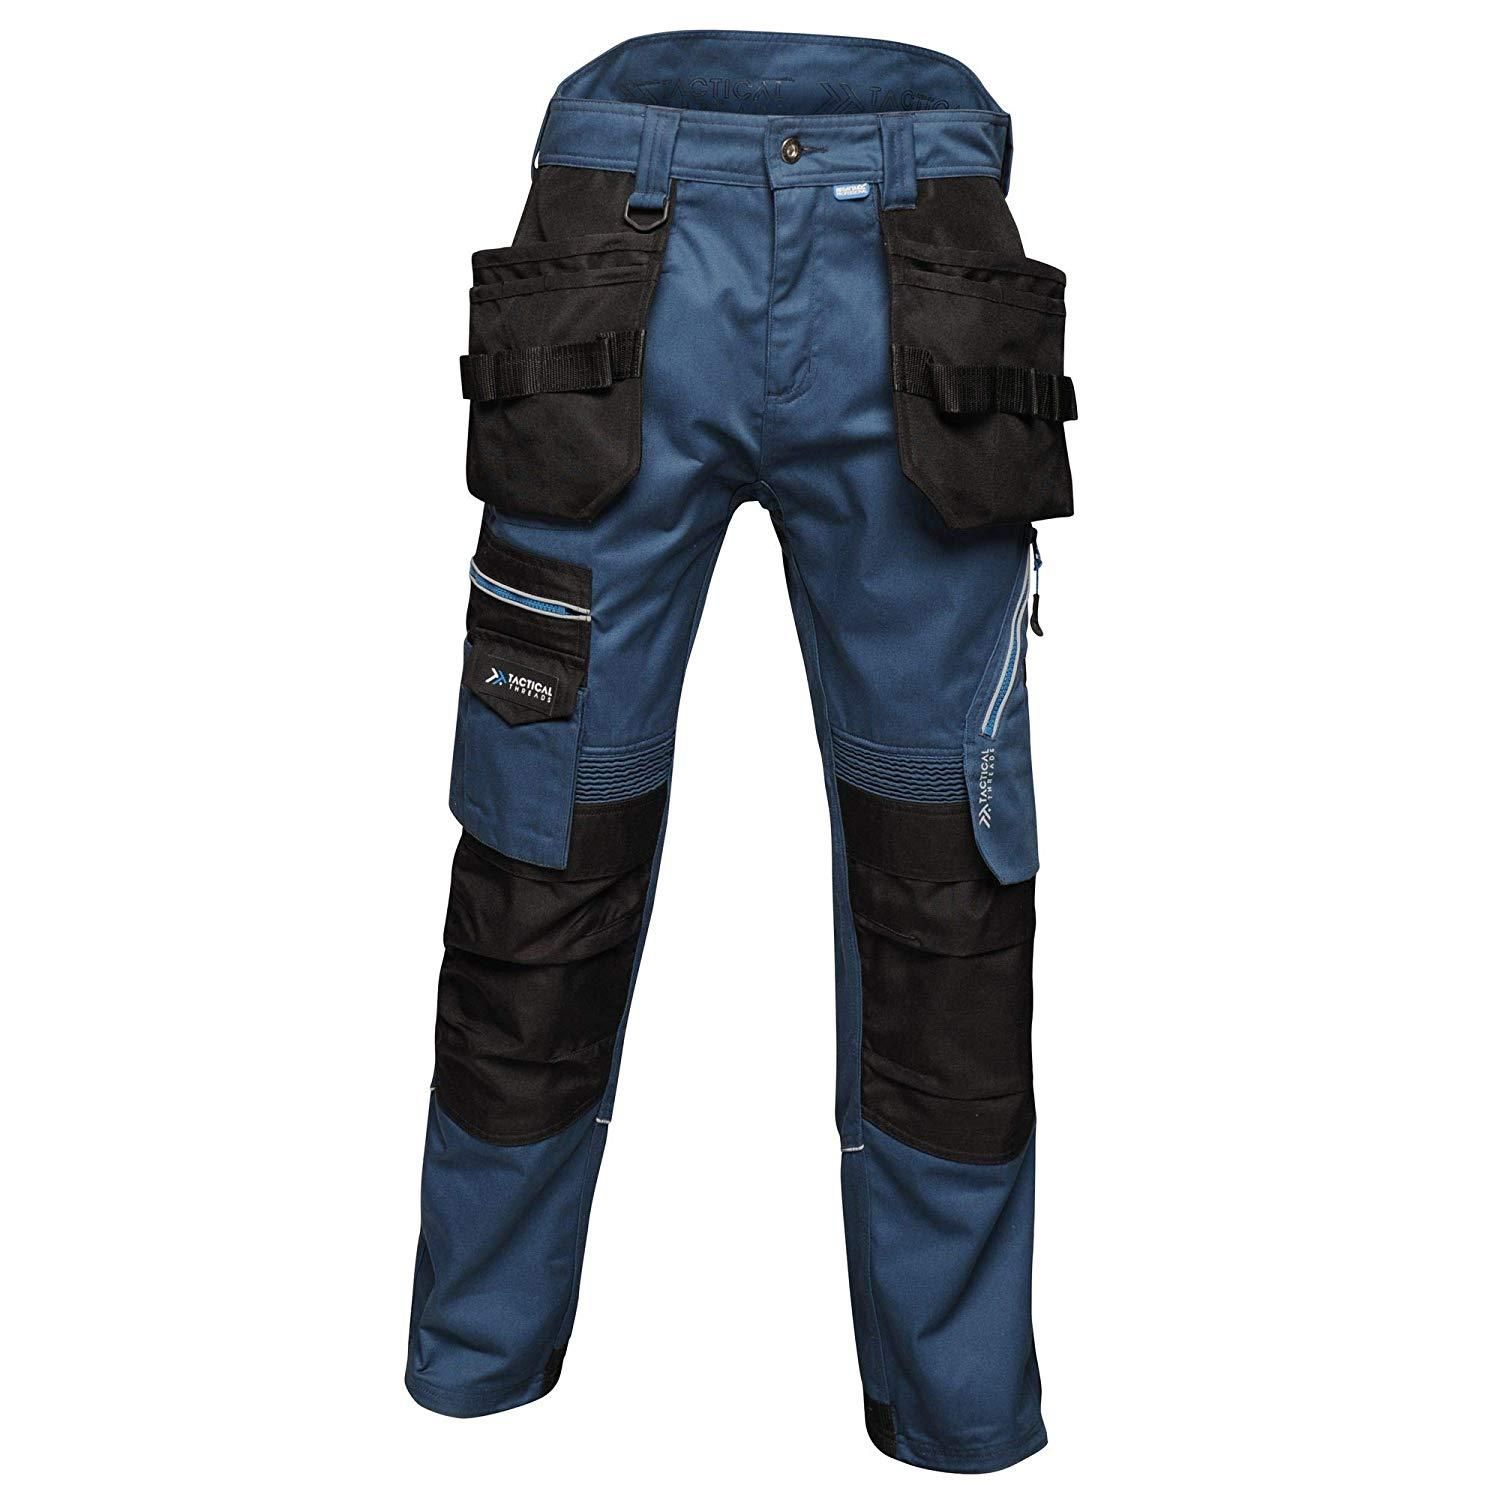 65% Polyester, 35% Cotton. Mens premium work trousers feature 2 front pockets and 3 front zipped pockets. Shank button at waist for extra strength. Shaped high back waistband for comfort. Inner anti-slip waistband print, reflective piping to the rear of legs. Belt loops, D-ring attachment, slim fit design, reinforced hem overlays. Made from poly/cotton twill fabric.